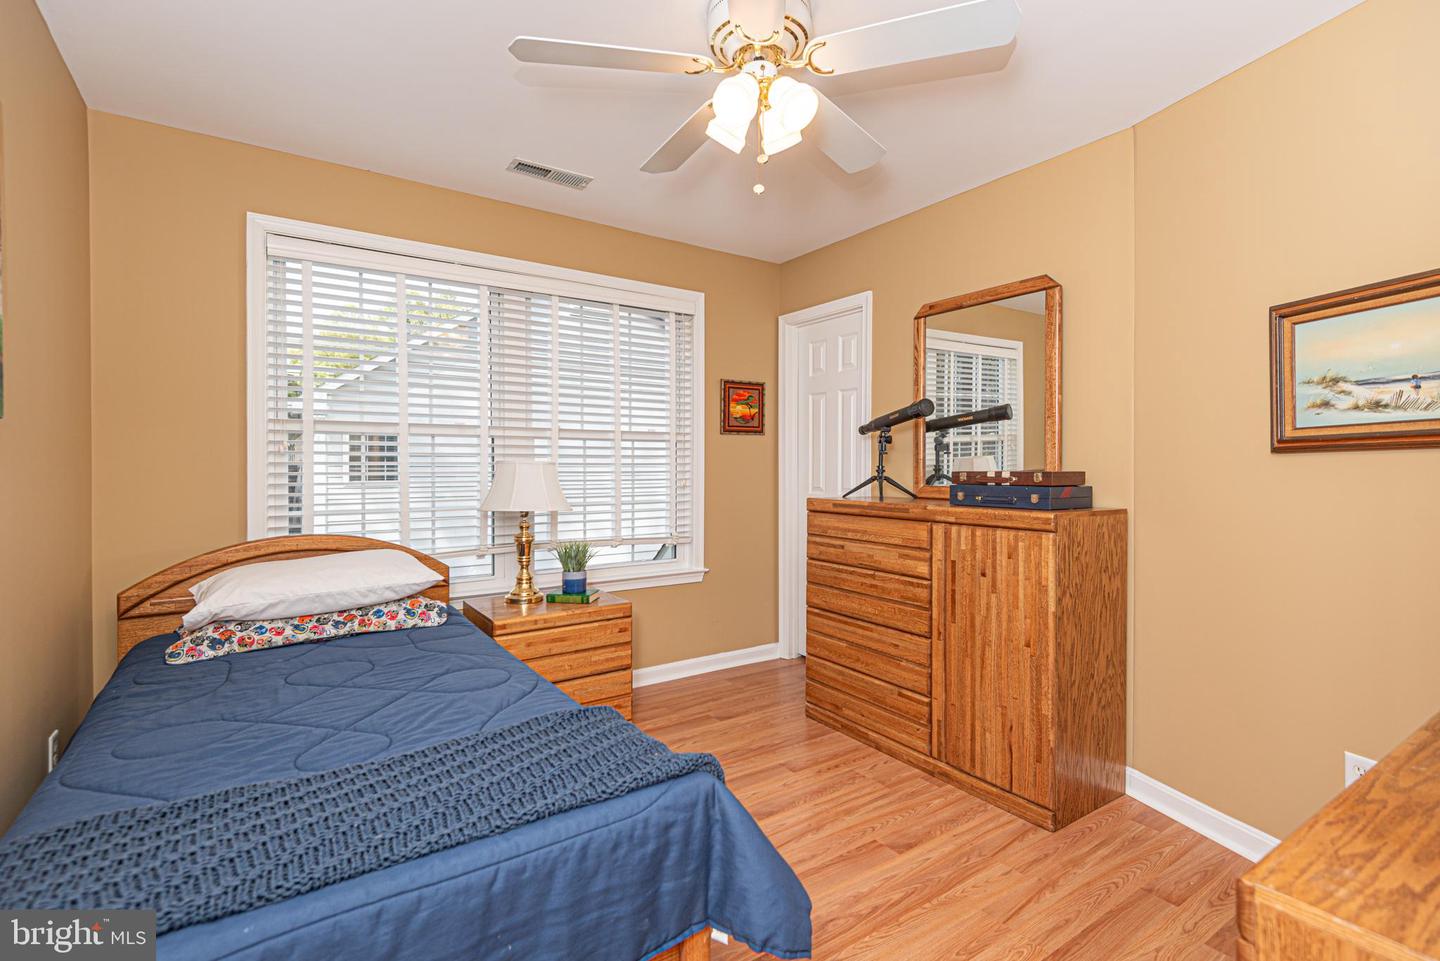 MDWO2019426-802904005088-2024-03-08-00-14-49 106 Pine Forest Dr | Berlin, MD Real Estate For Sale | MLS# Mdwo2019426  - 1st Choice Properties